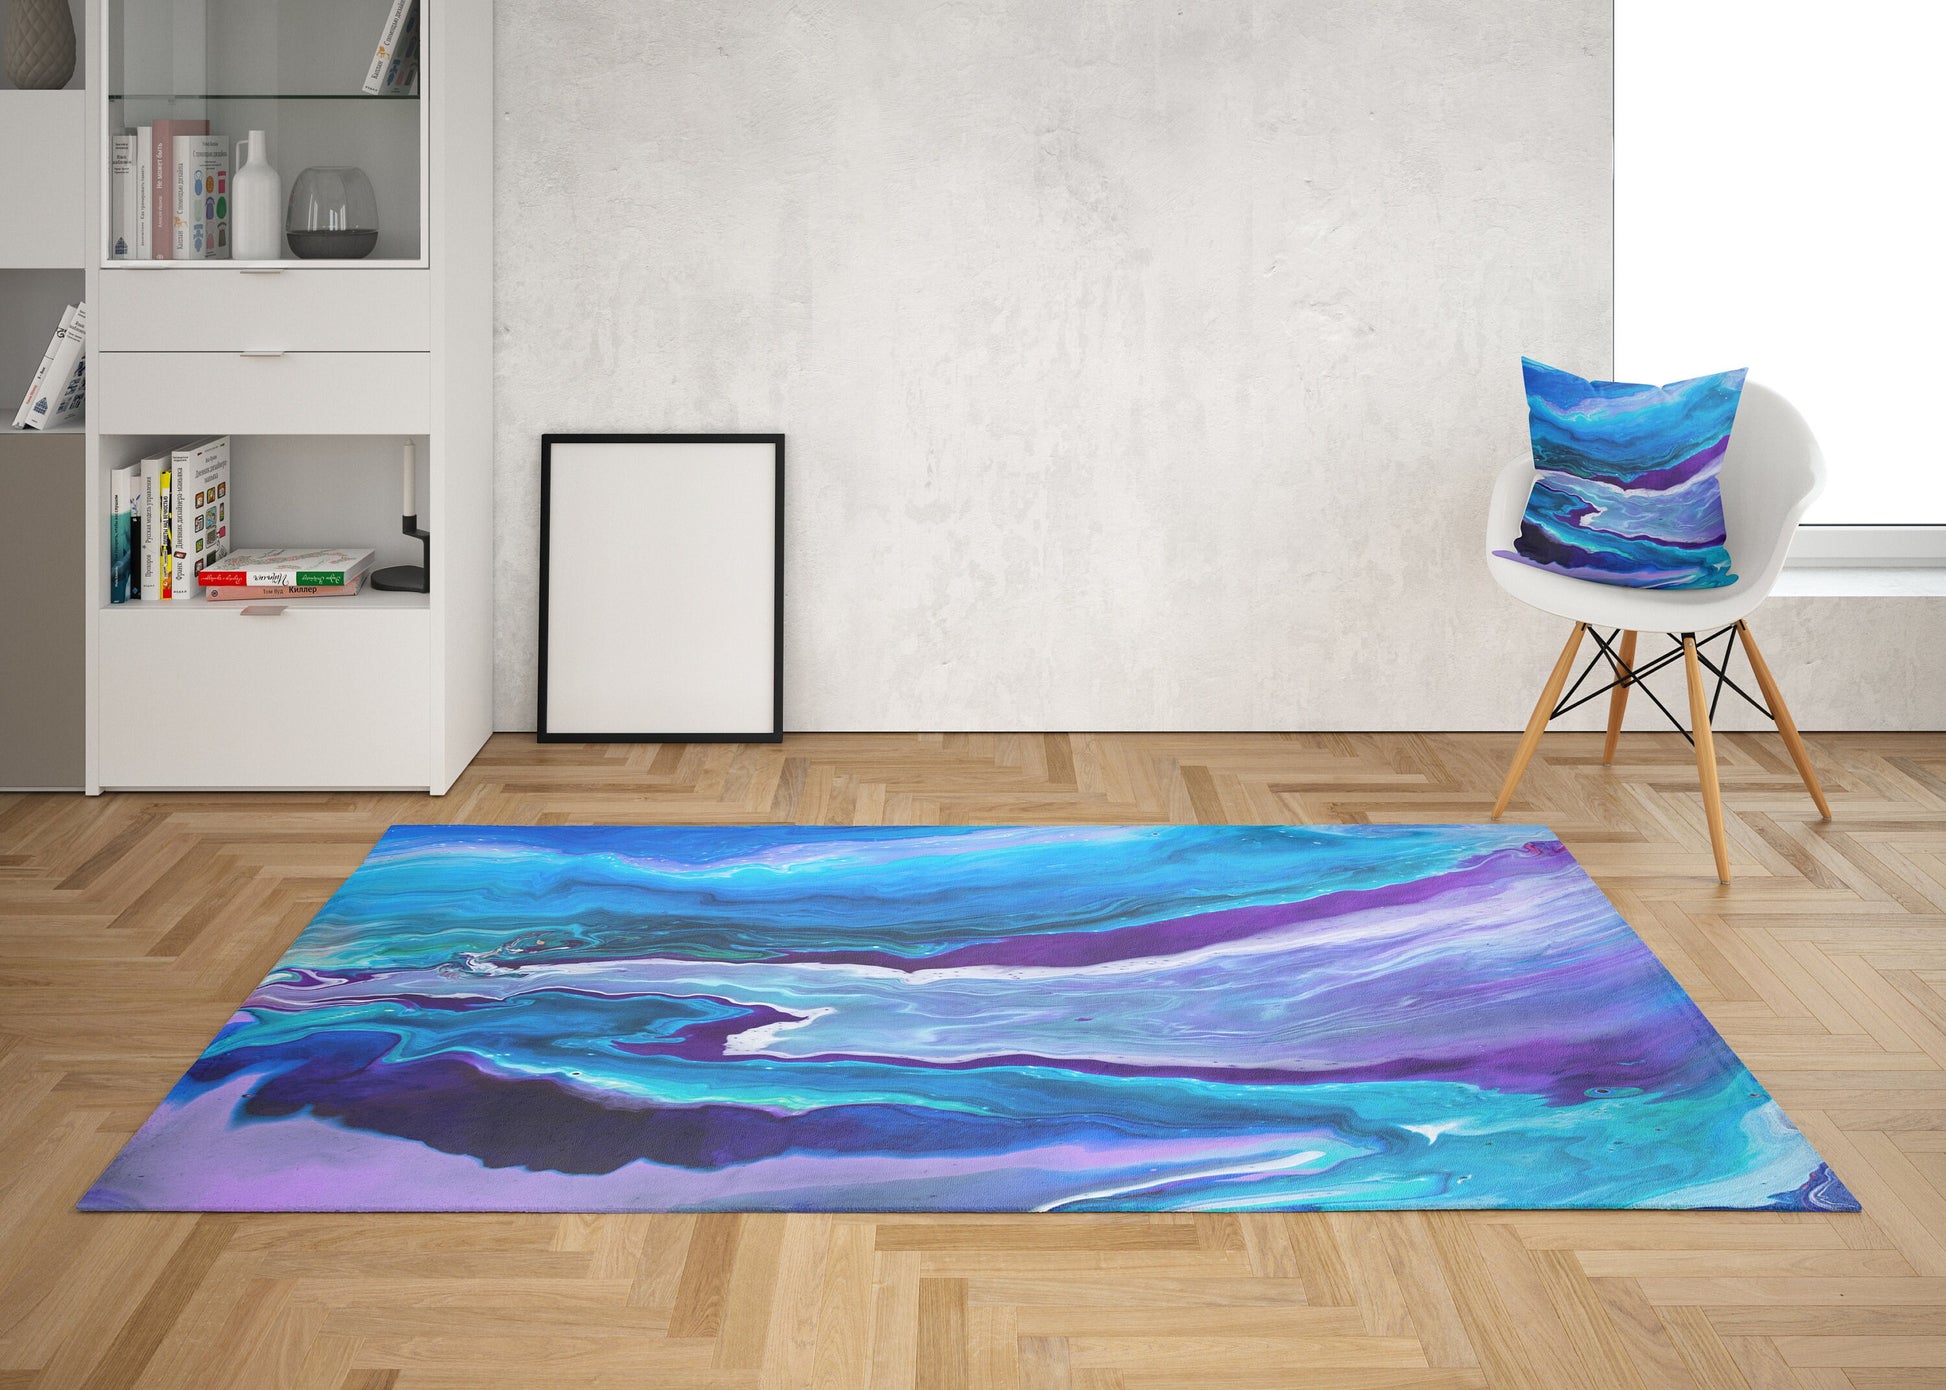 Blue Rug Colorful Rug Blue Floor Rug Blue Mat ocean rug unique Gift blue Rugs 3'x5' 4'x6' 5'x7' Large psychadelic rugs psychedelic rug sea